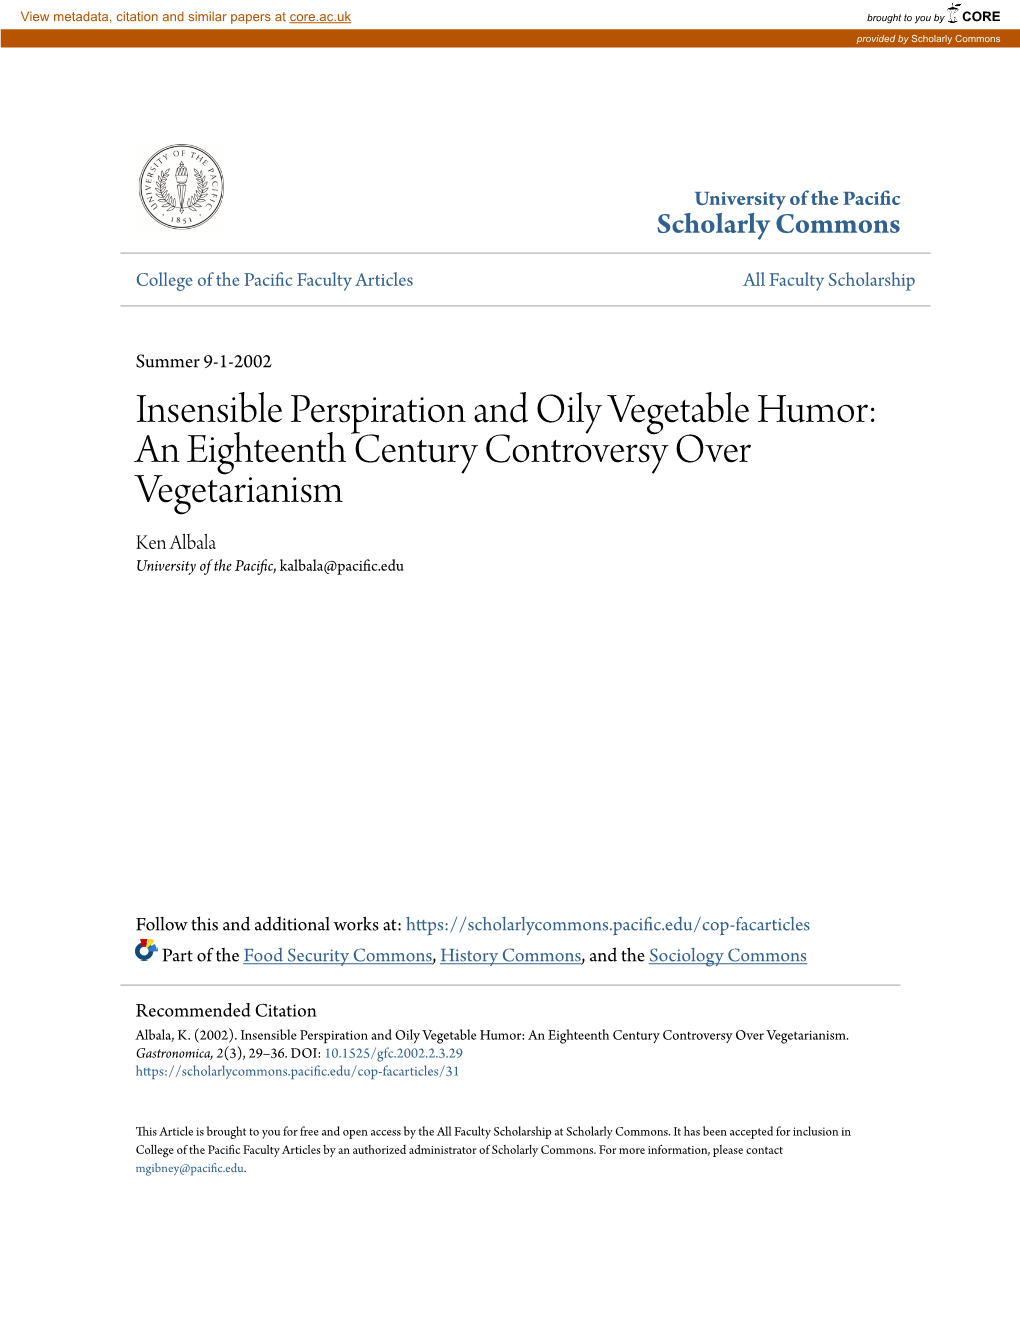 Insensible Perspiration and Oily Vegetable Humor: an Eighteenth Century Controversy Over Vegetarianism Ken Albala University of the Pacific, Kalbala@Pacific.Edu